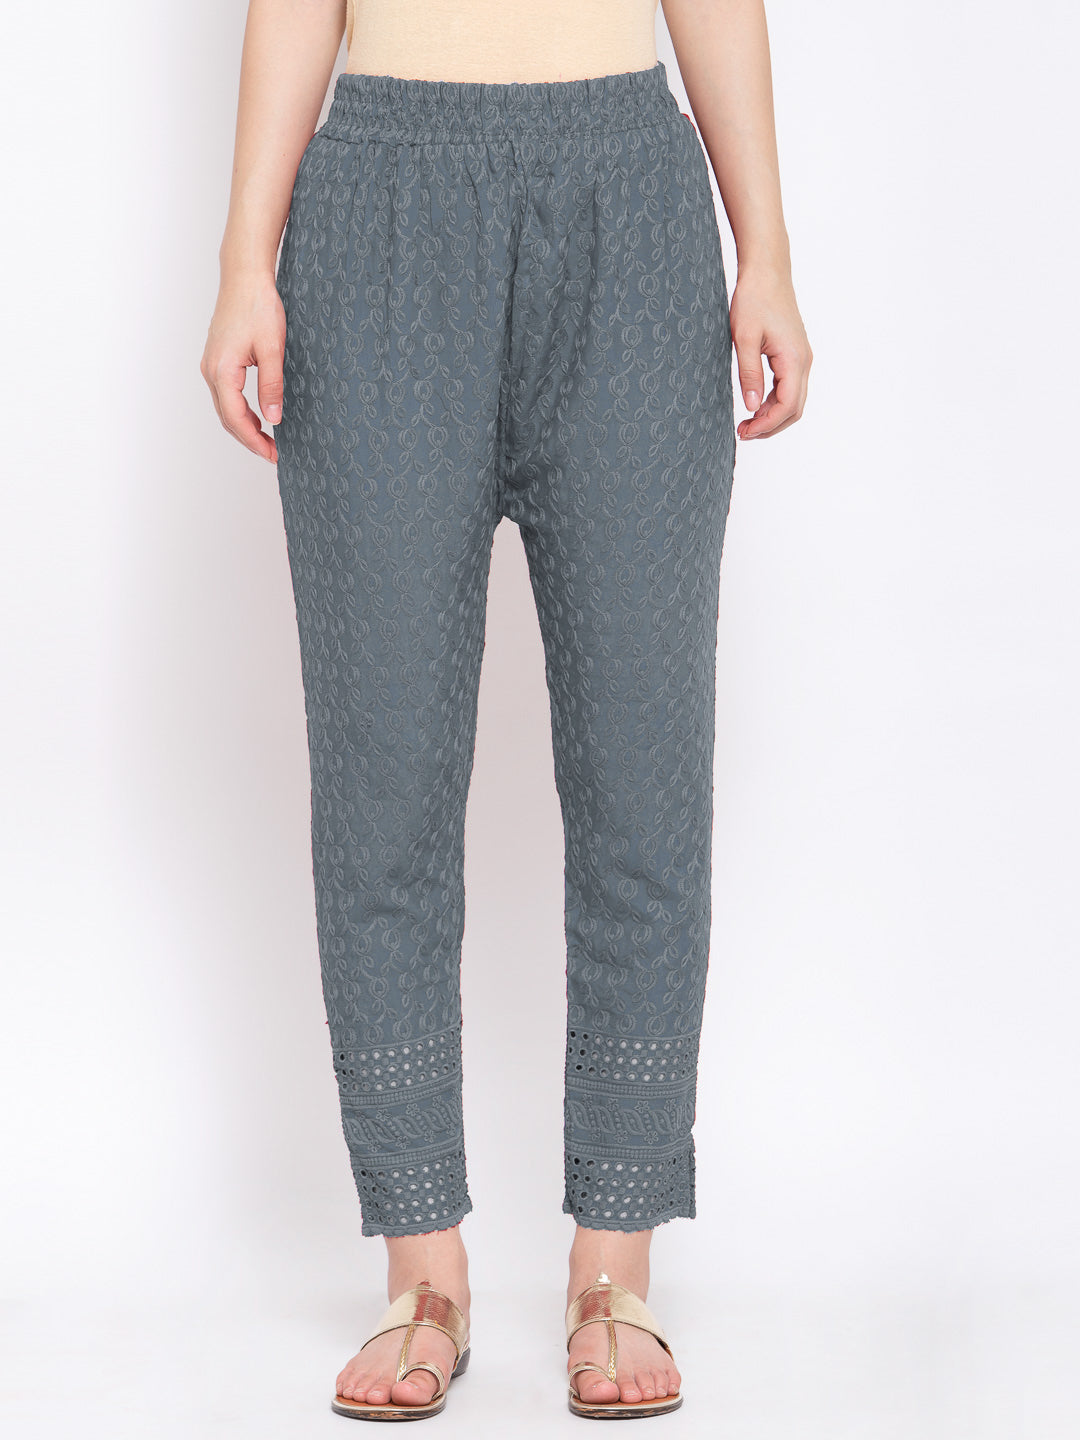 KLOTTHE Grey Cotton Embroidered Trouser